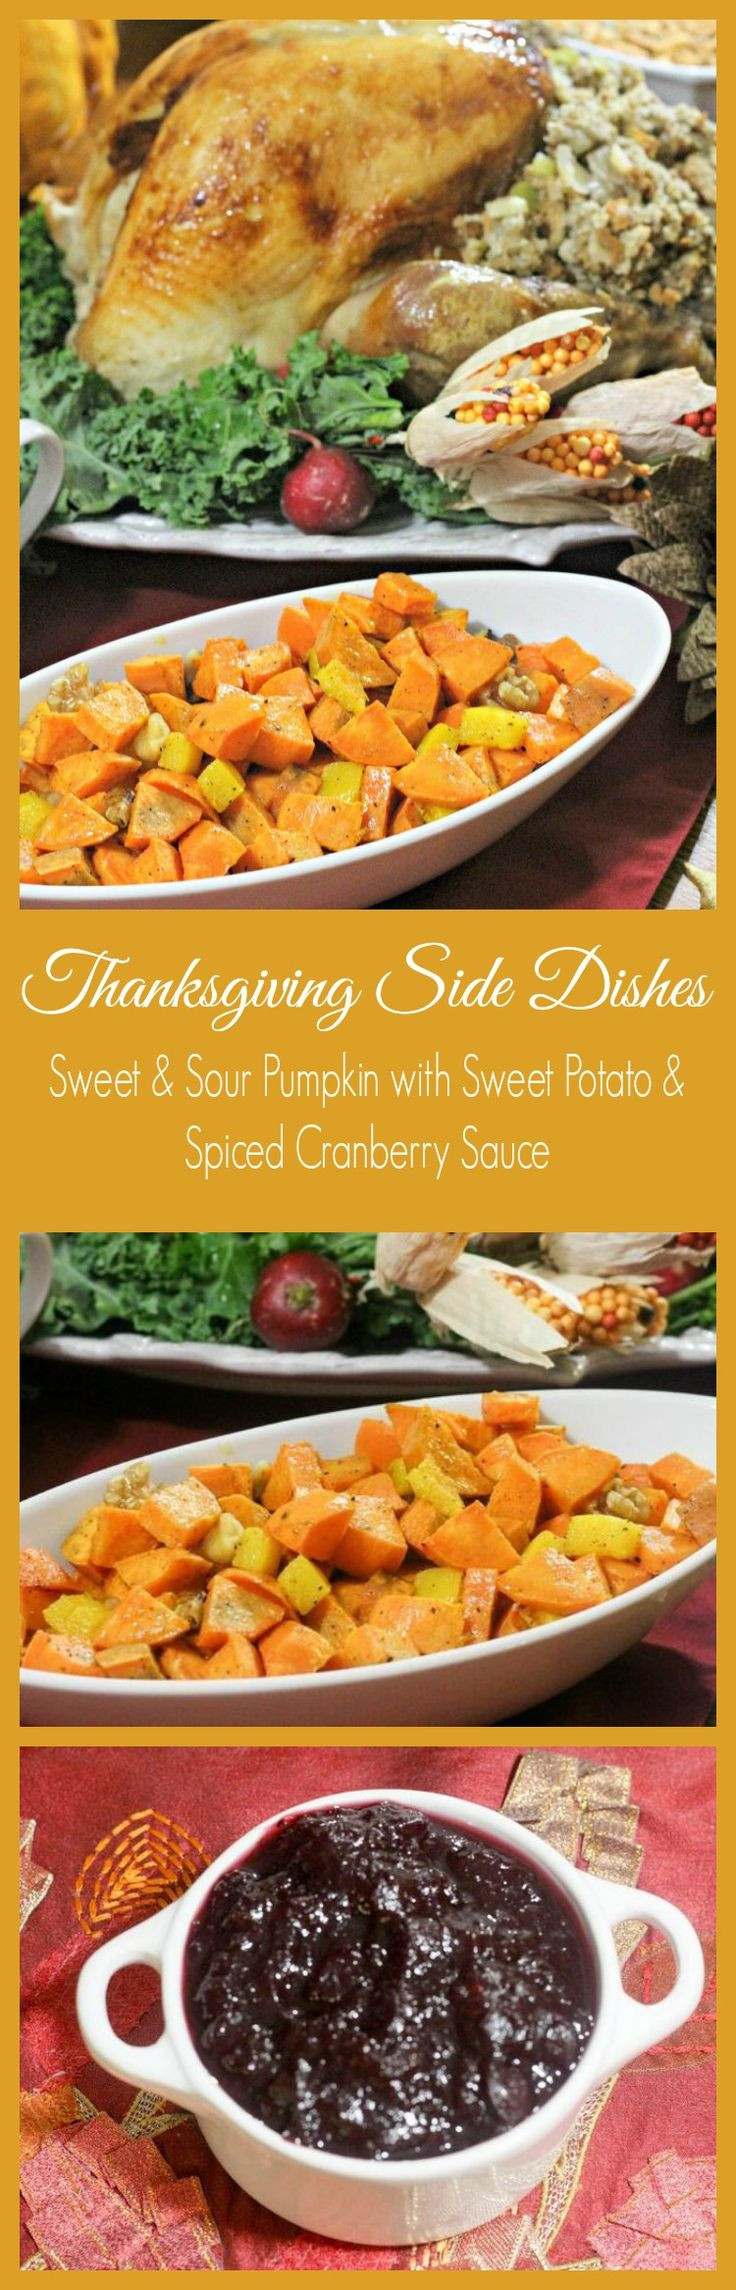 Amazing Thanksgiving Side Dishes
 Sweet & Sour Pumpkin and Sweet Potato Amazing